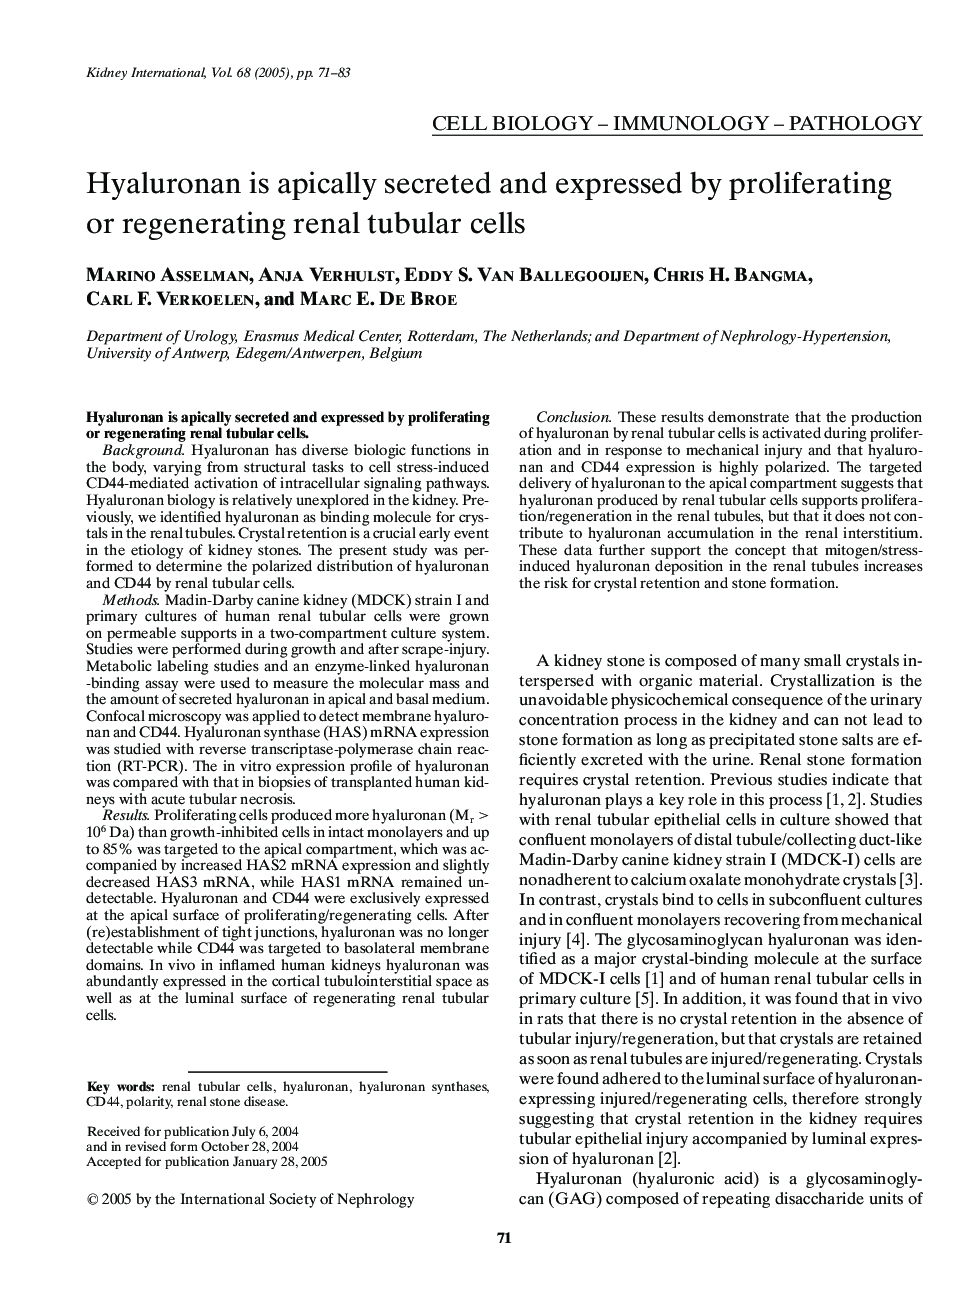 Hyaluronan is apically secreted and expressed by proliferating or regenerating renal tubular cells